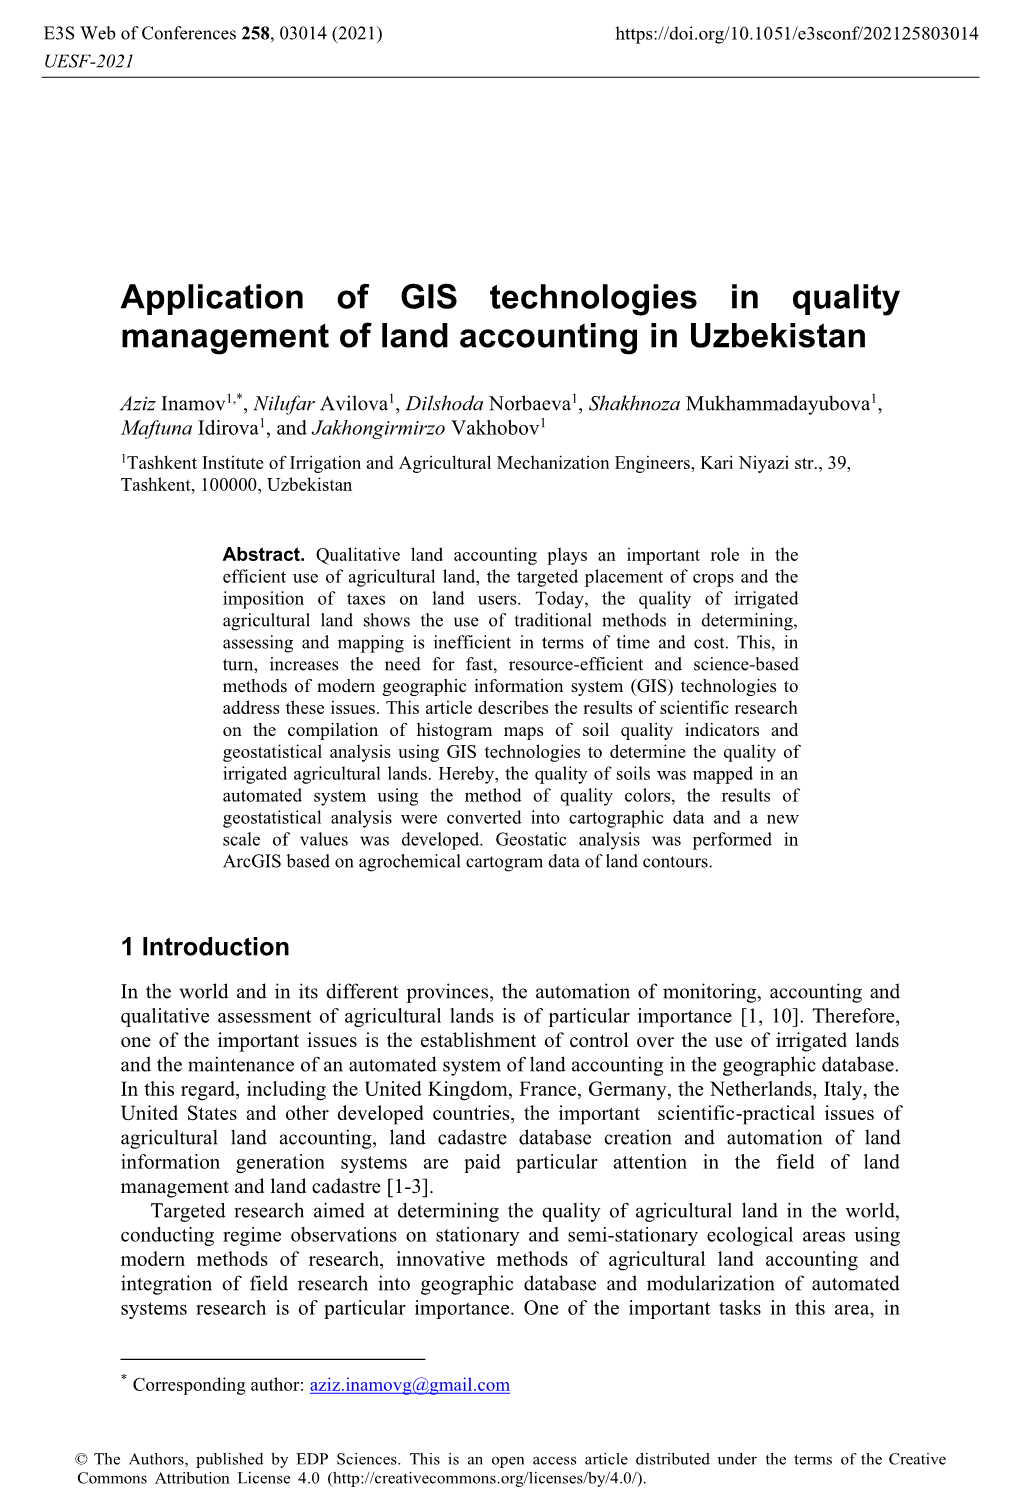 Application of GIS Technologies in Quality Management of Land Accounting in Uzbekistan